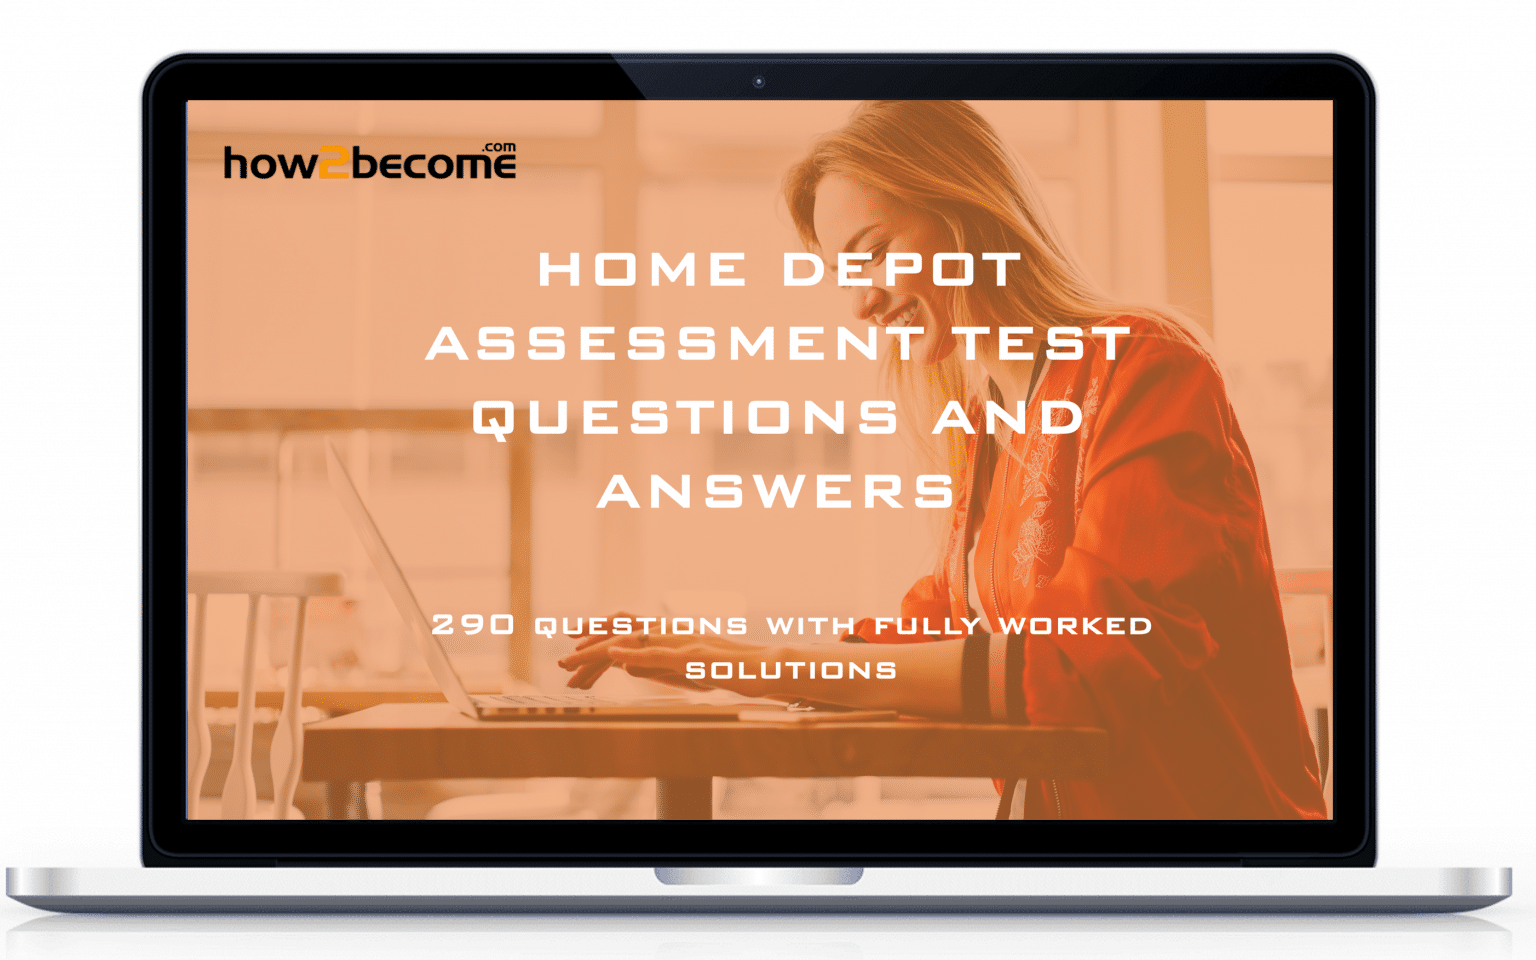 Home Depot Assessment Test Questions and Answers